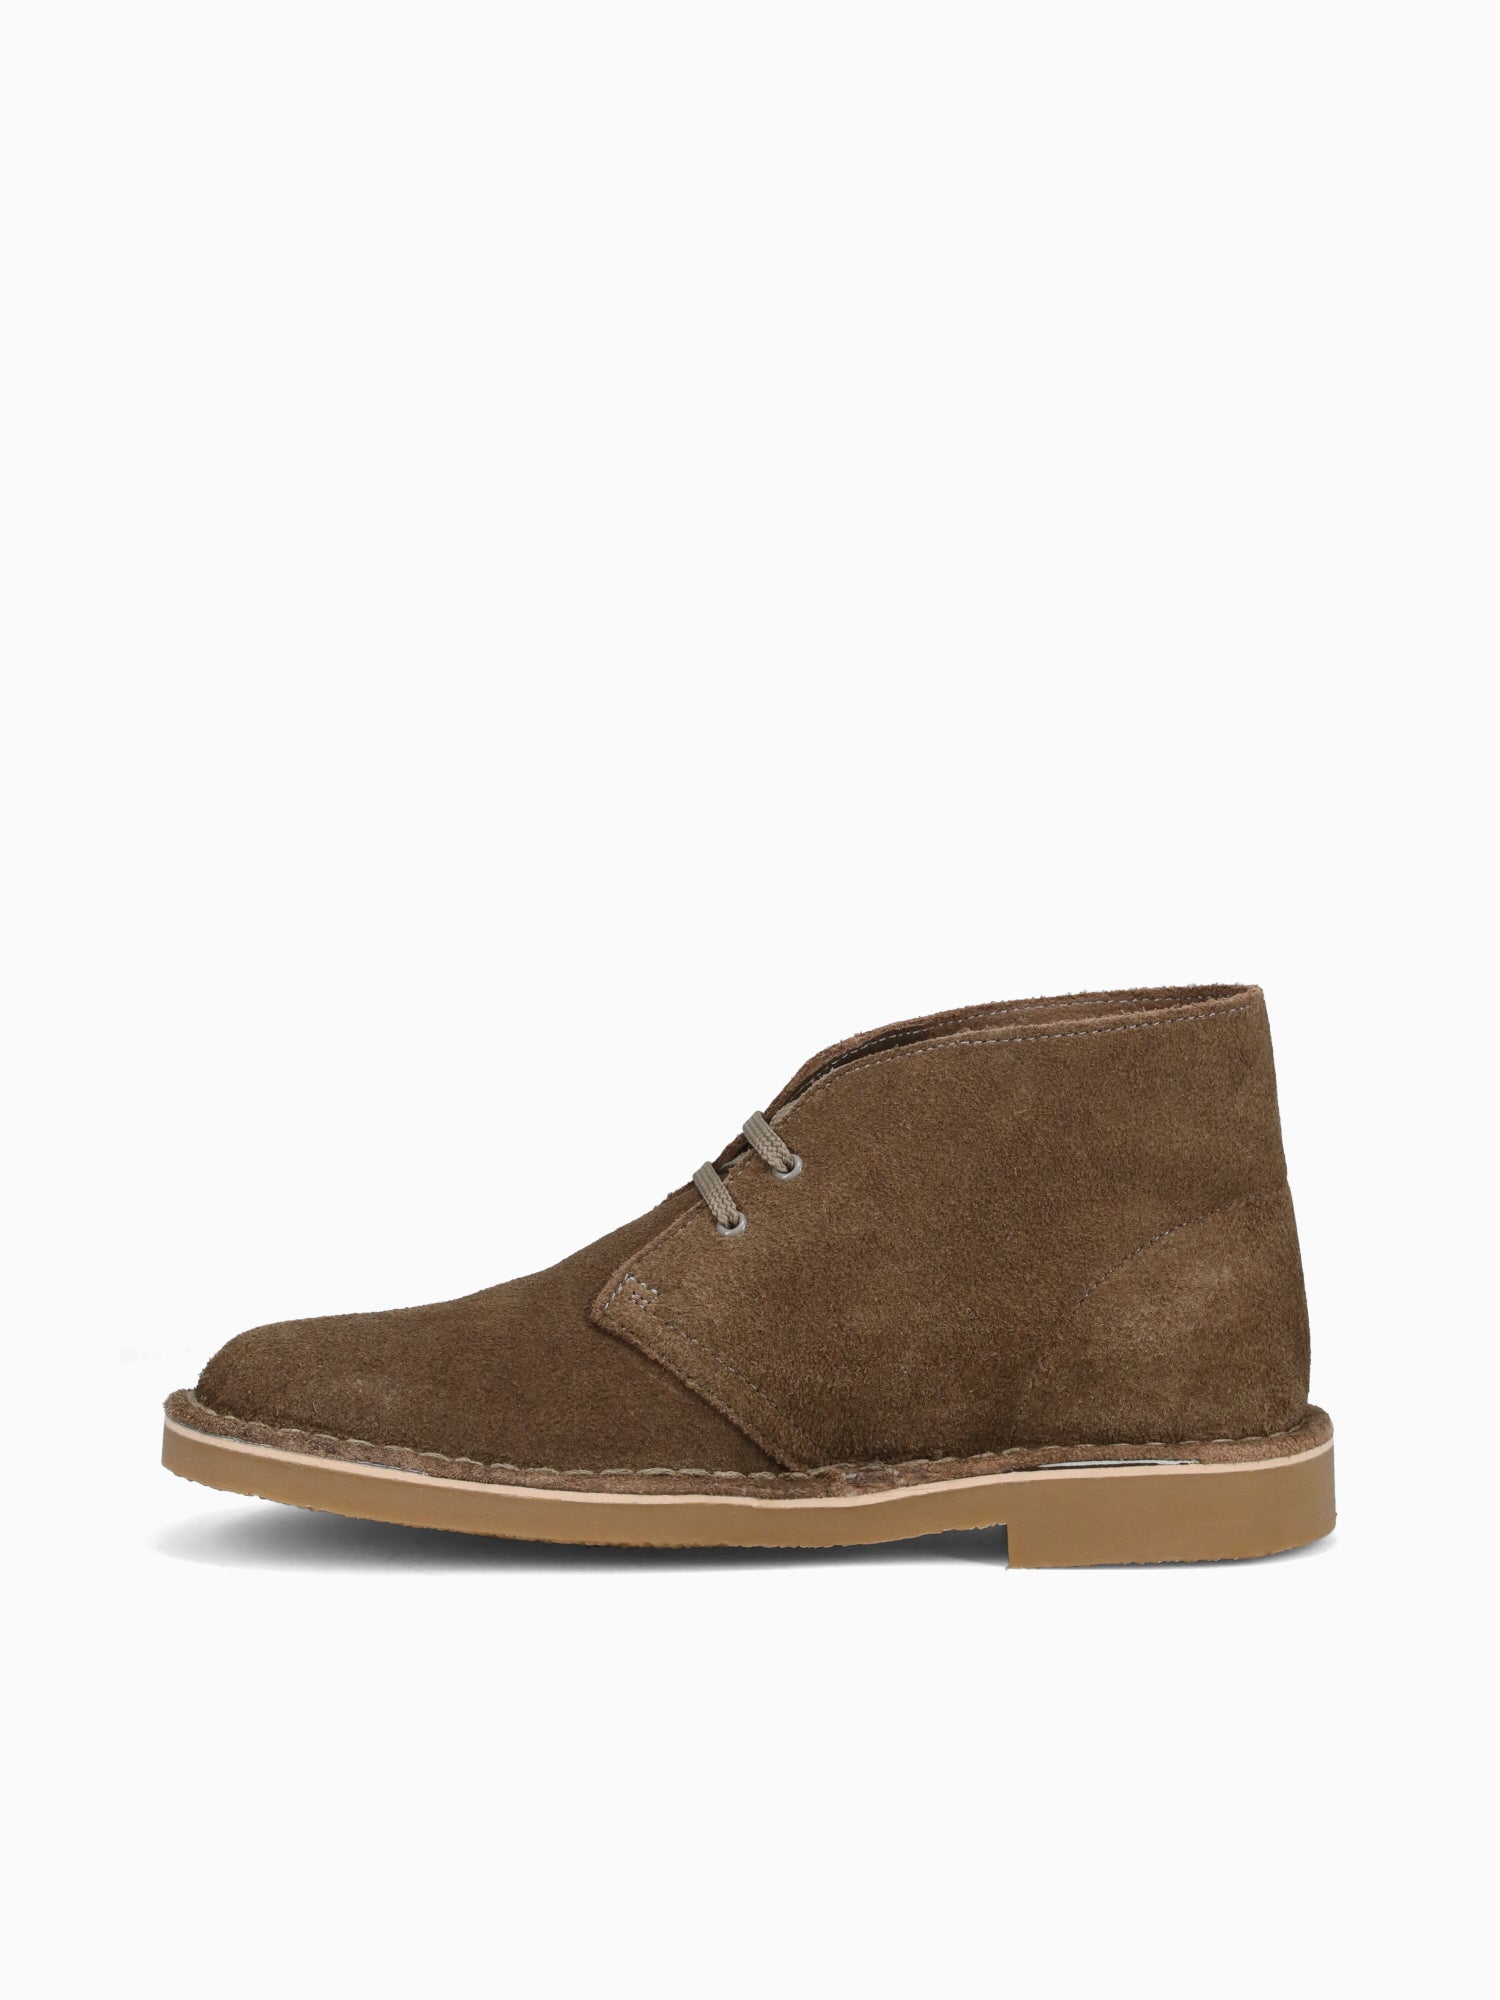 Bushacre 3 Sand Waxy Suede Natural / 7 / M